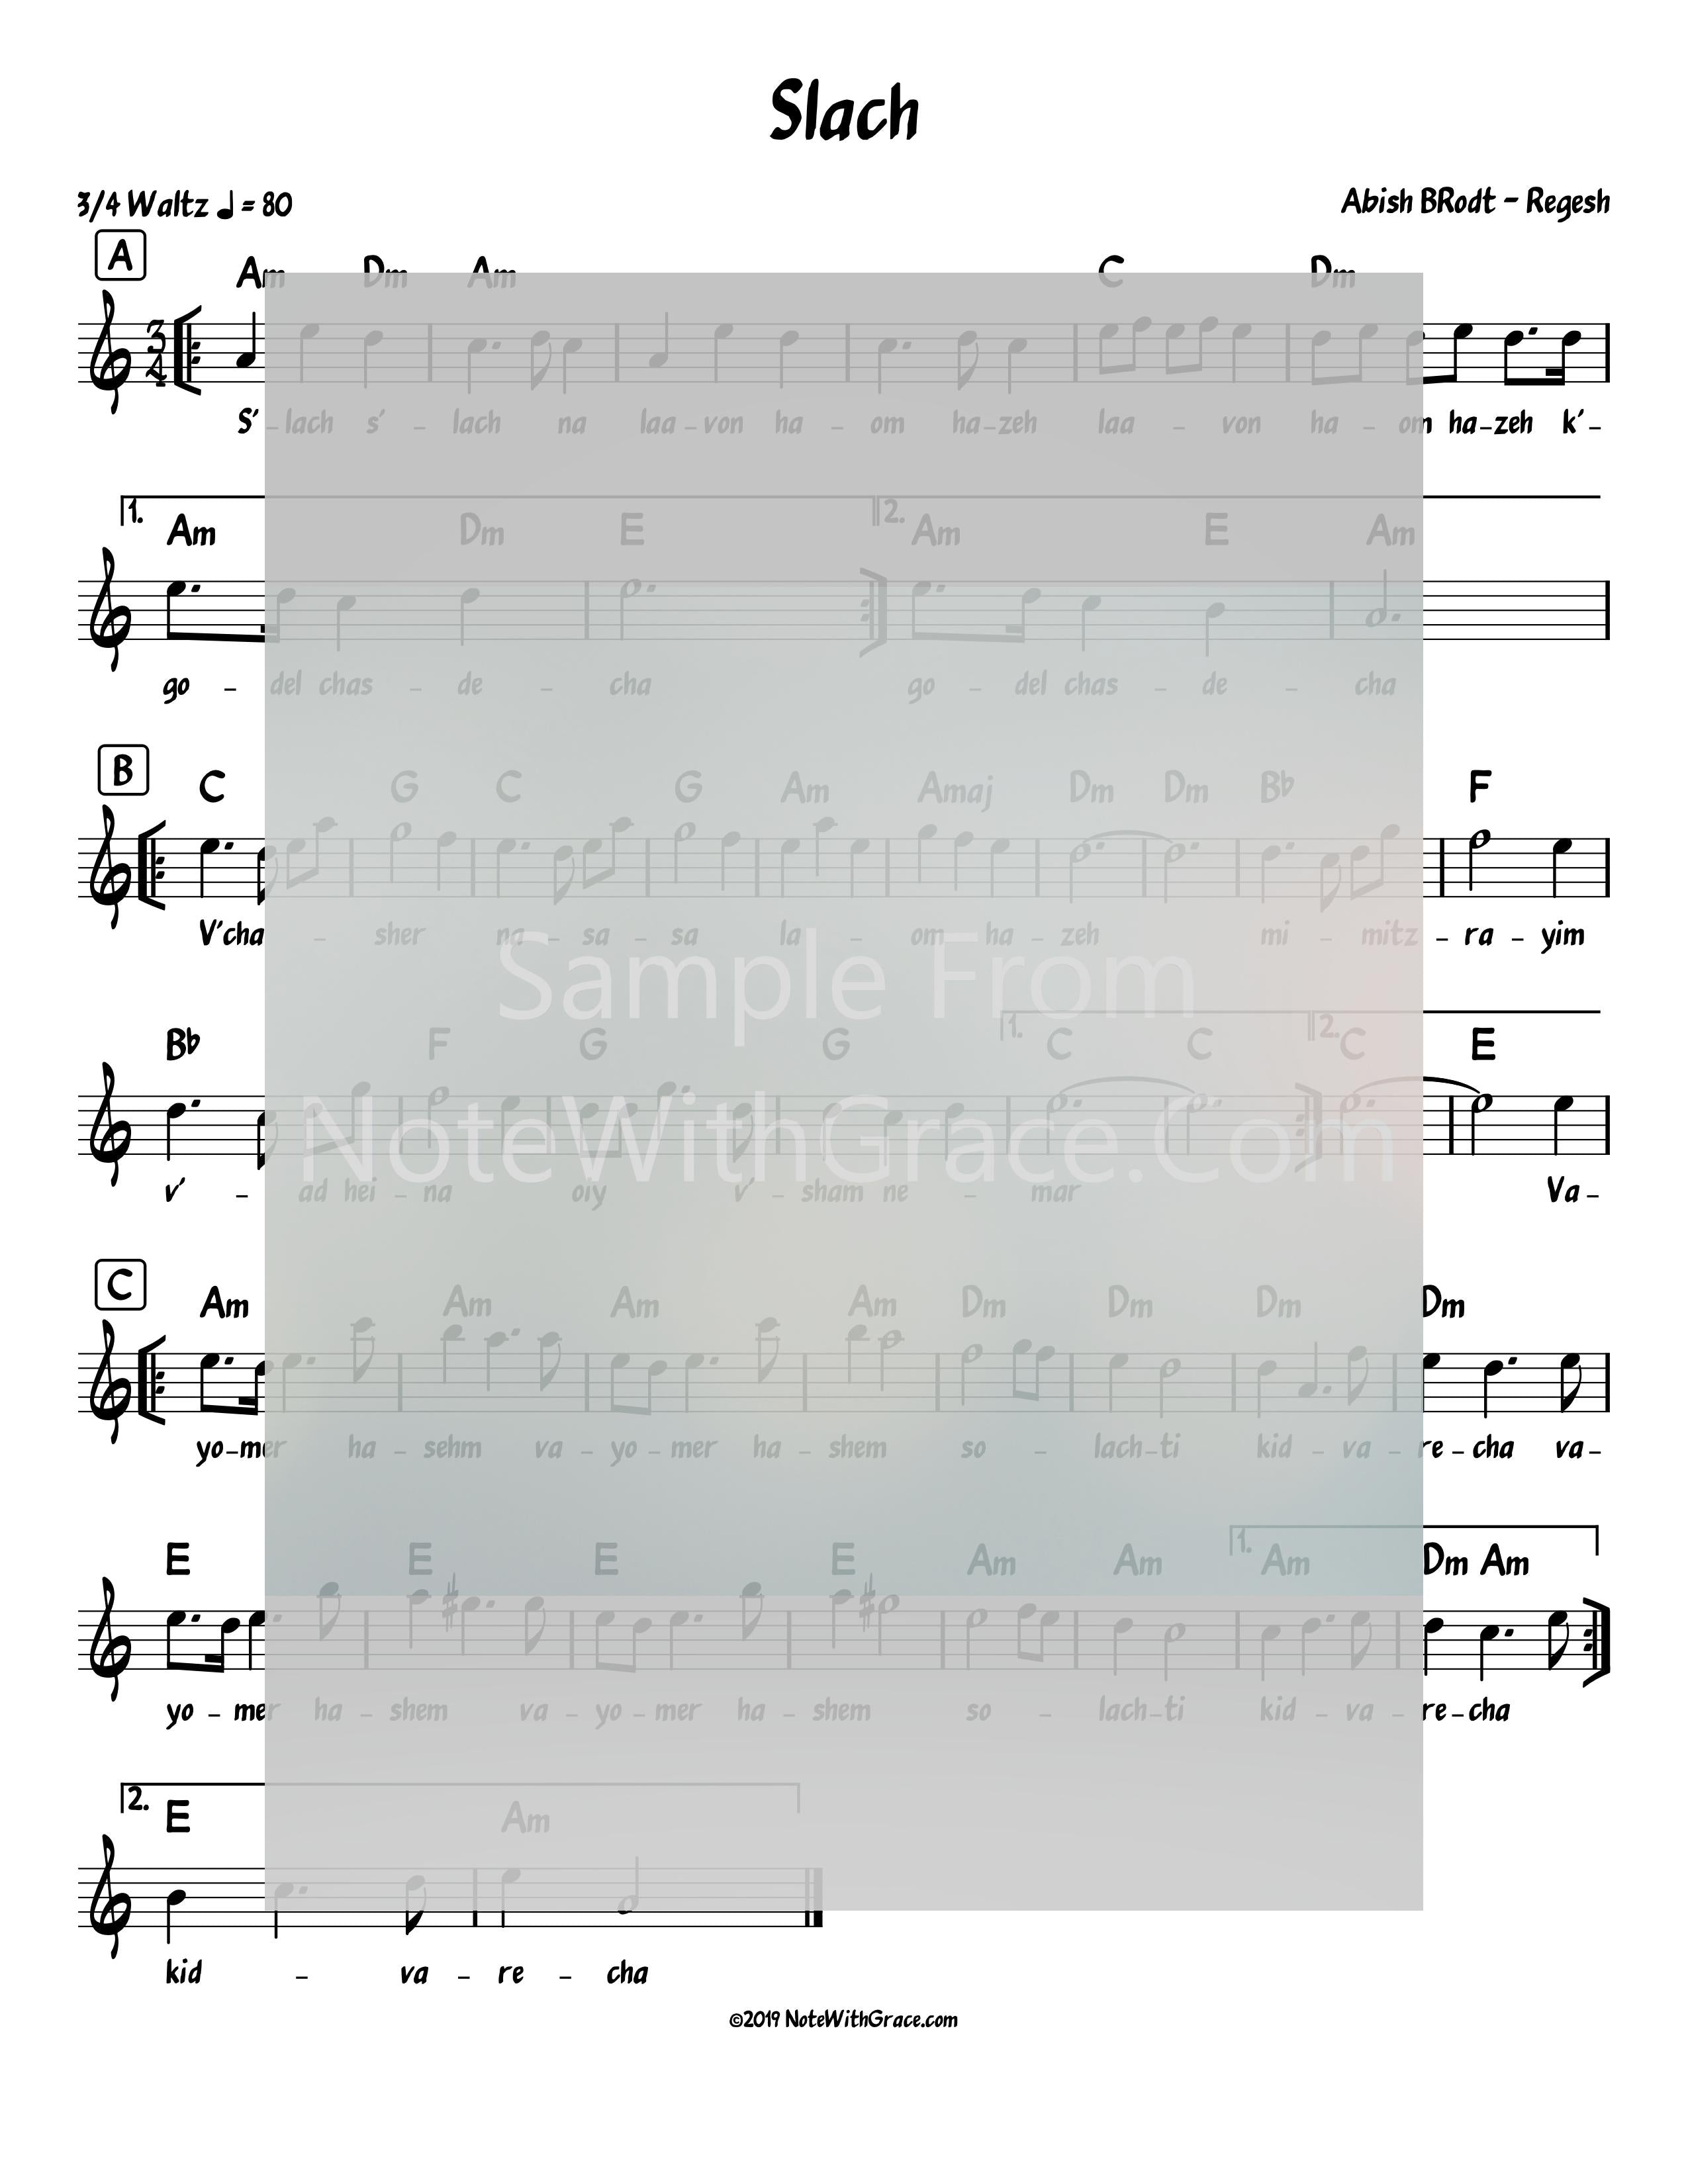 S'lach - סלח Lead Sheet (Abish Brodt) Album: Regesh Gold-Sheet music-NoteWithGrace.com